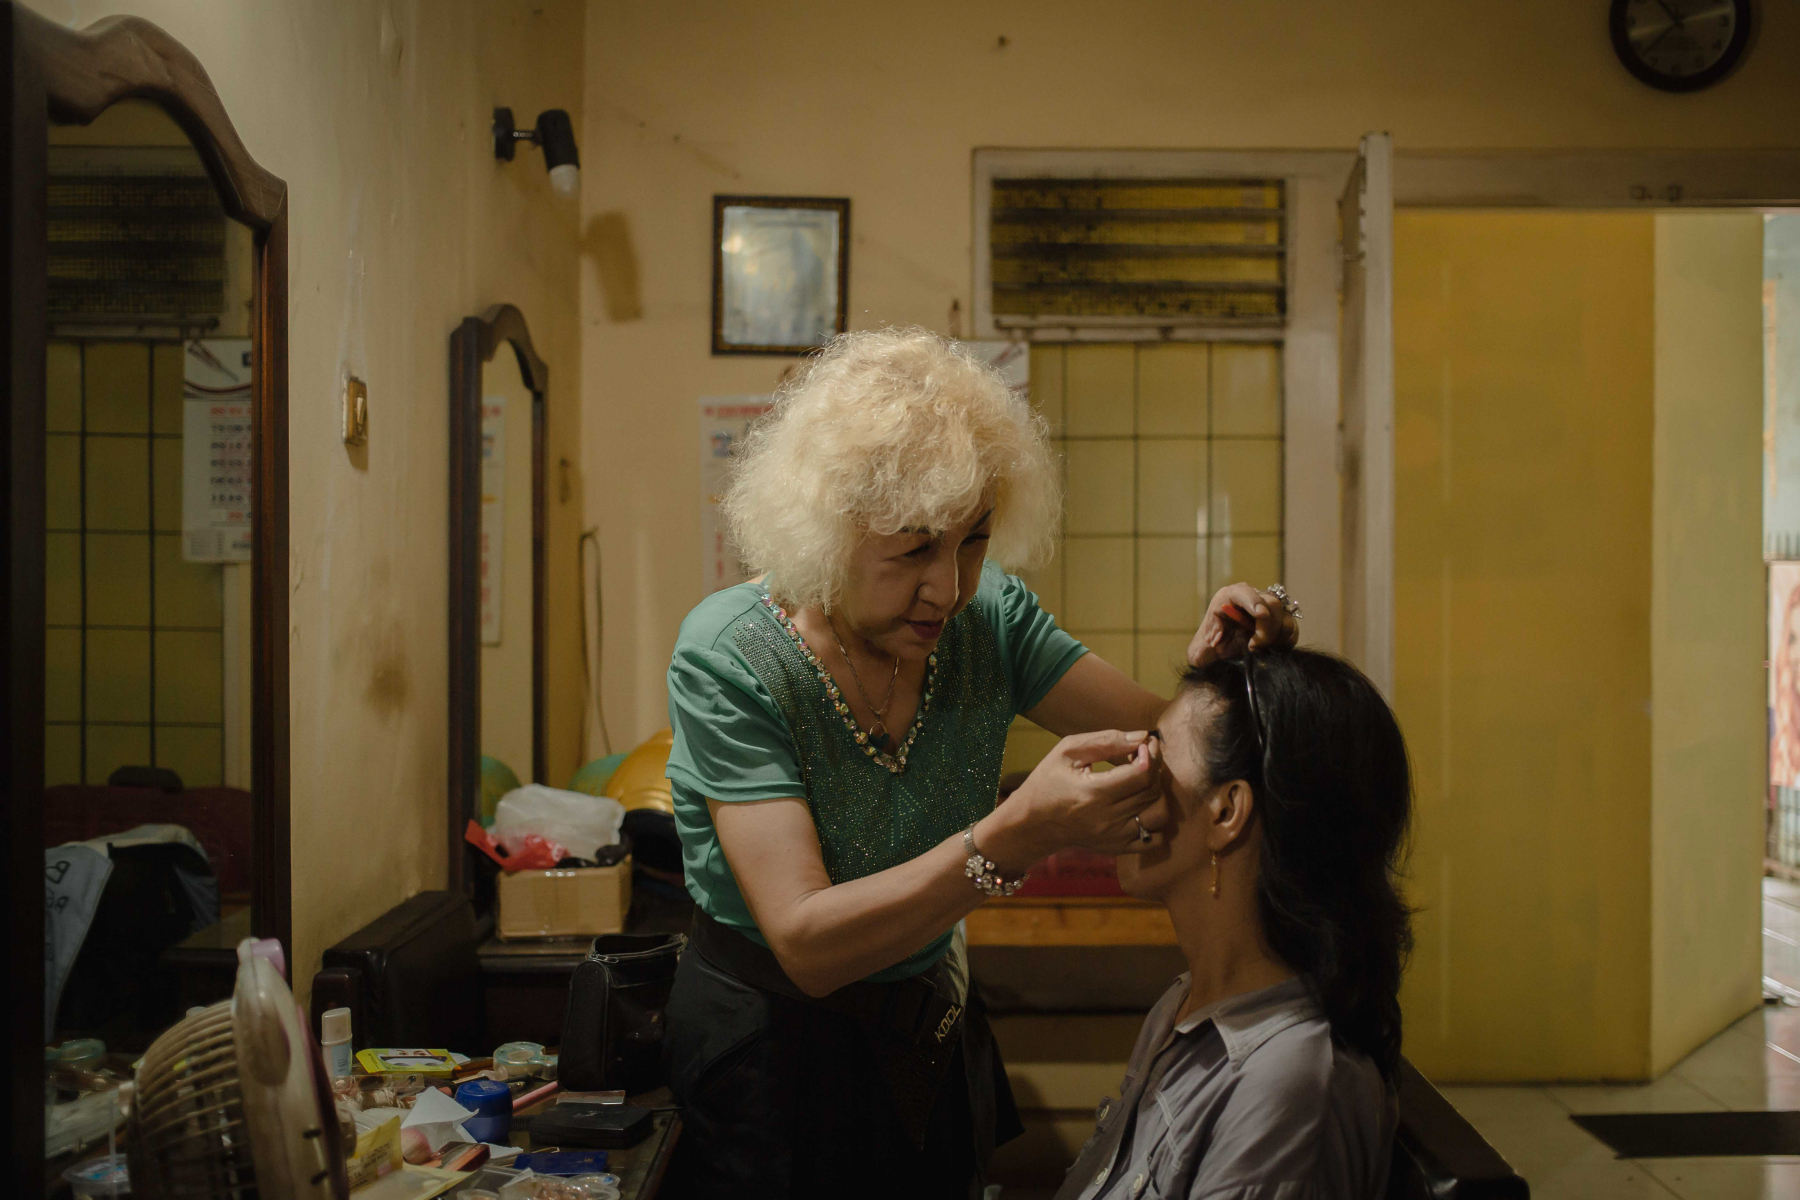 Before becoming a church, Handayani's house was originally a beauty salon. Rengga (64 years old) is one of the trans women who have the skills to make up.